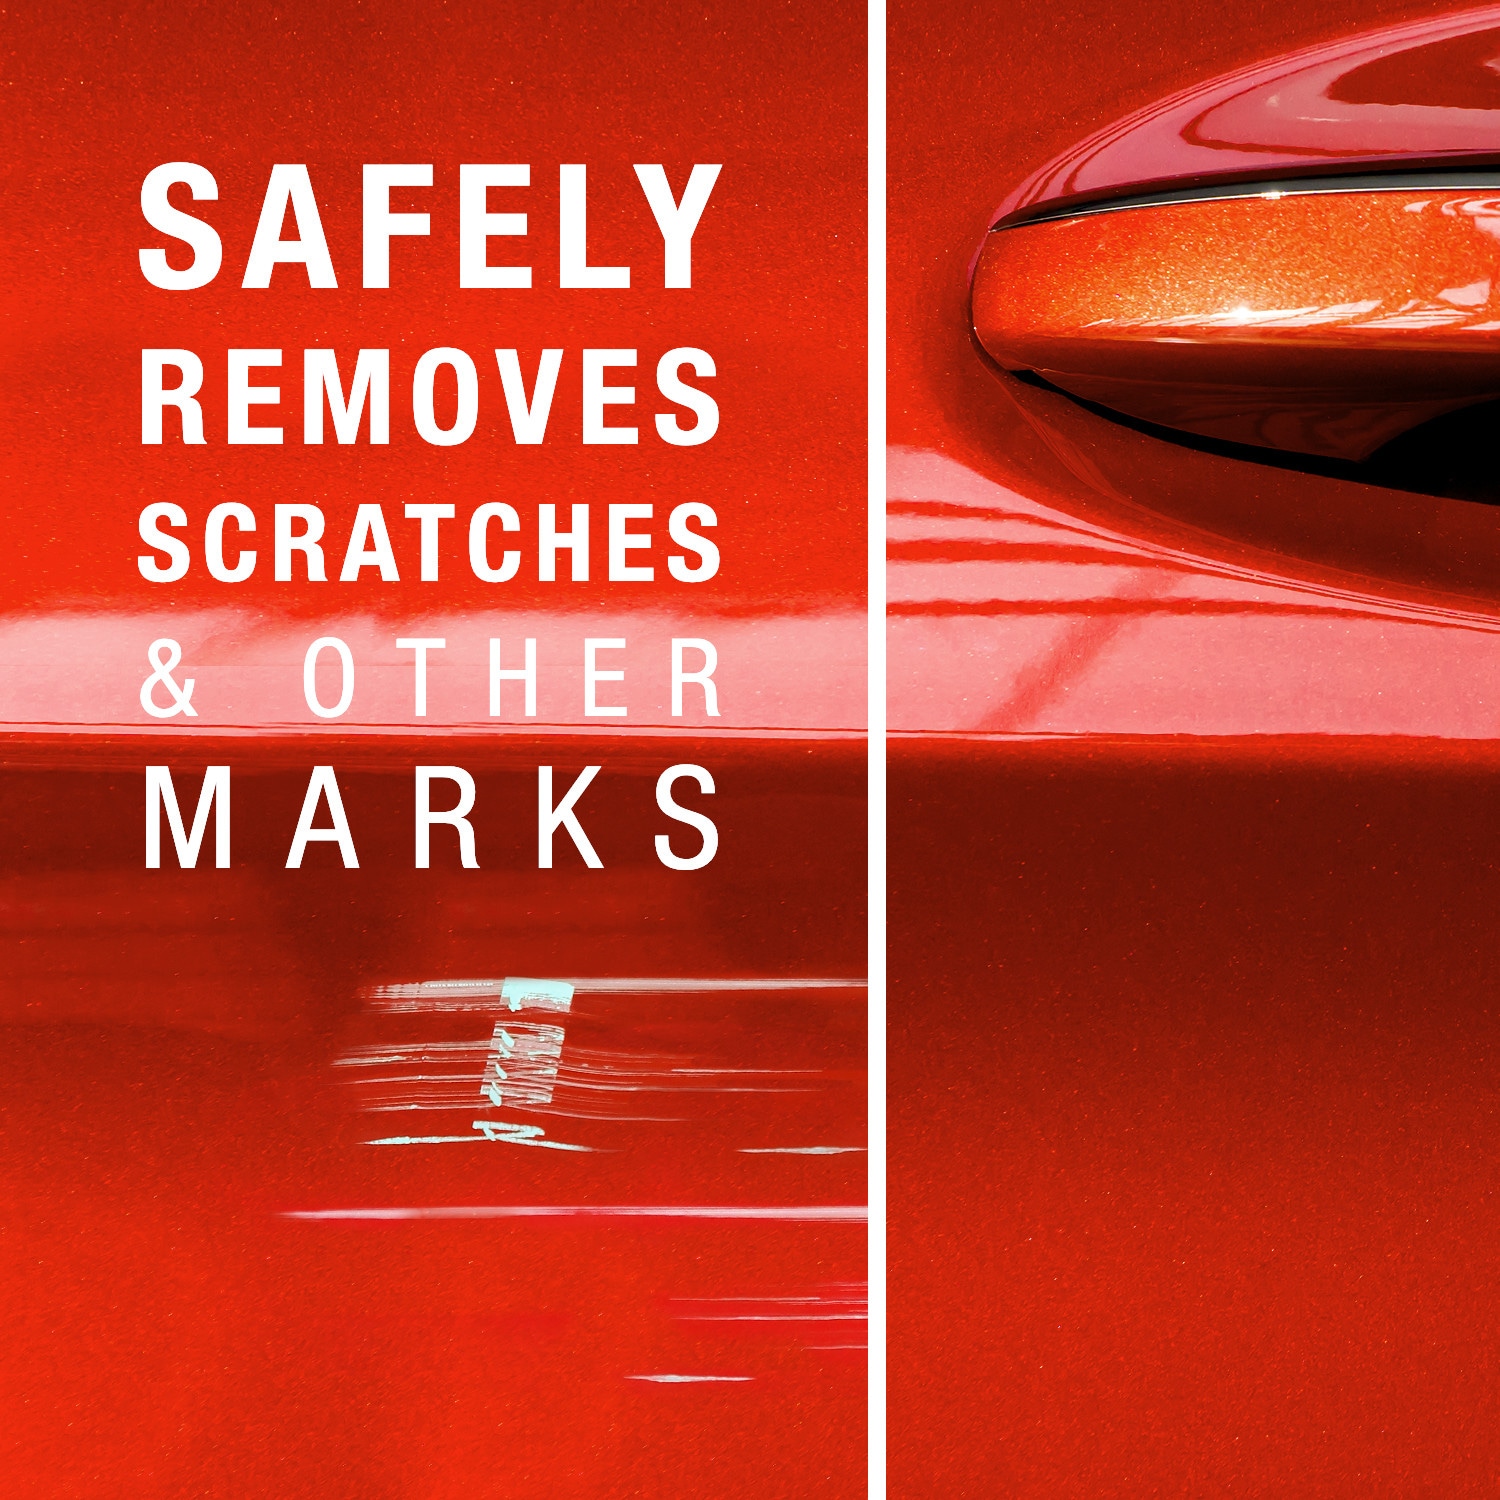 SCRATCH NO MORE - SCRATCH REMOVER – carzshiner